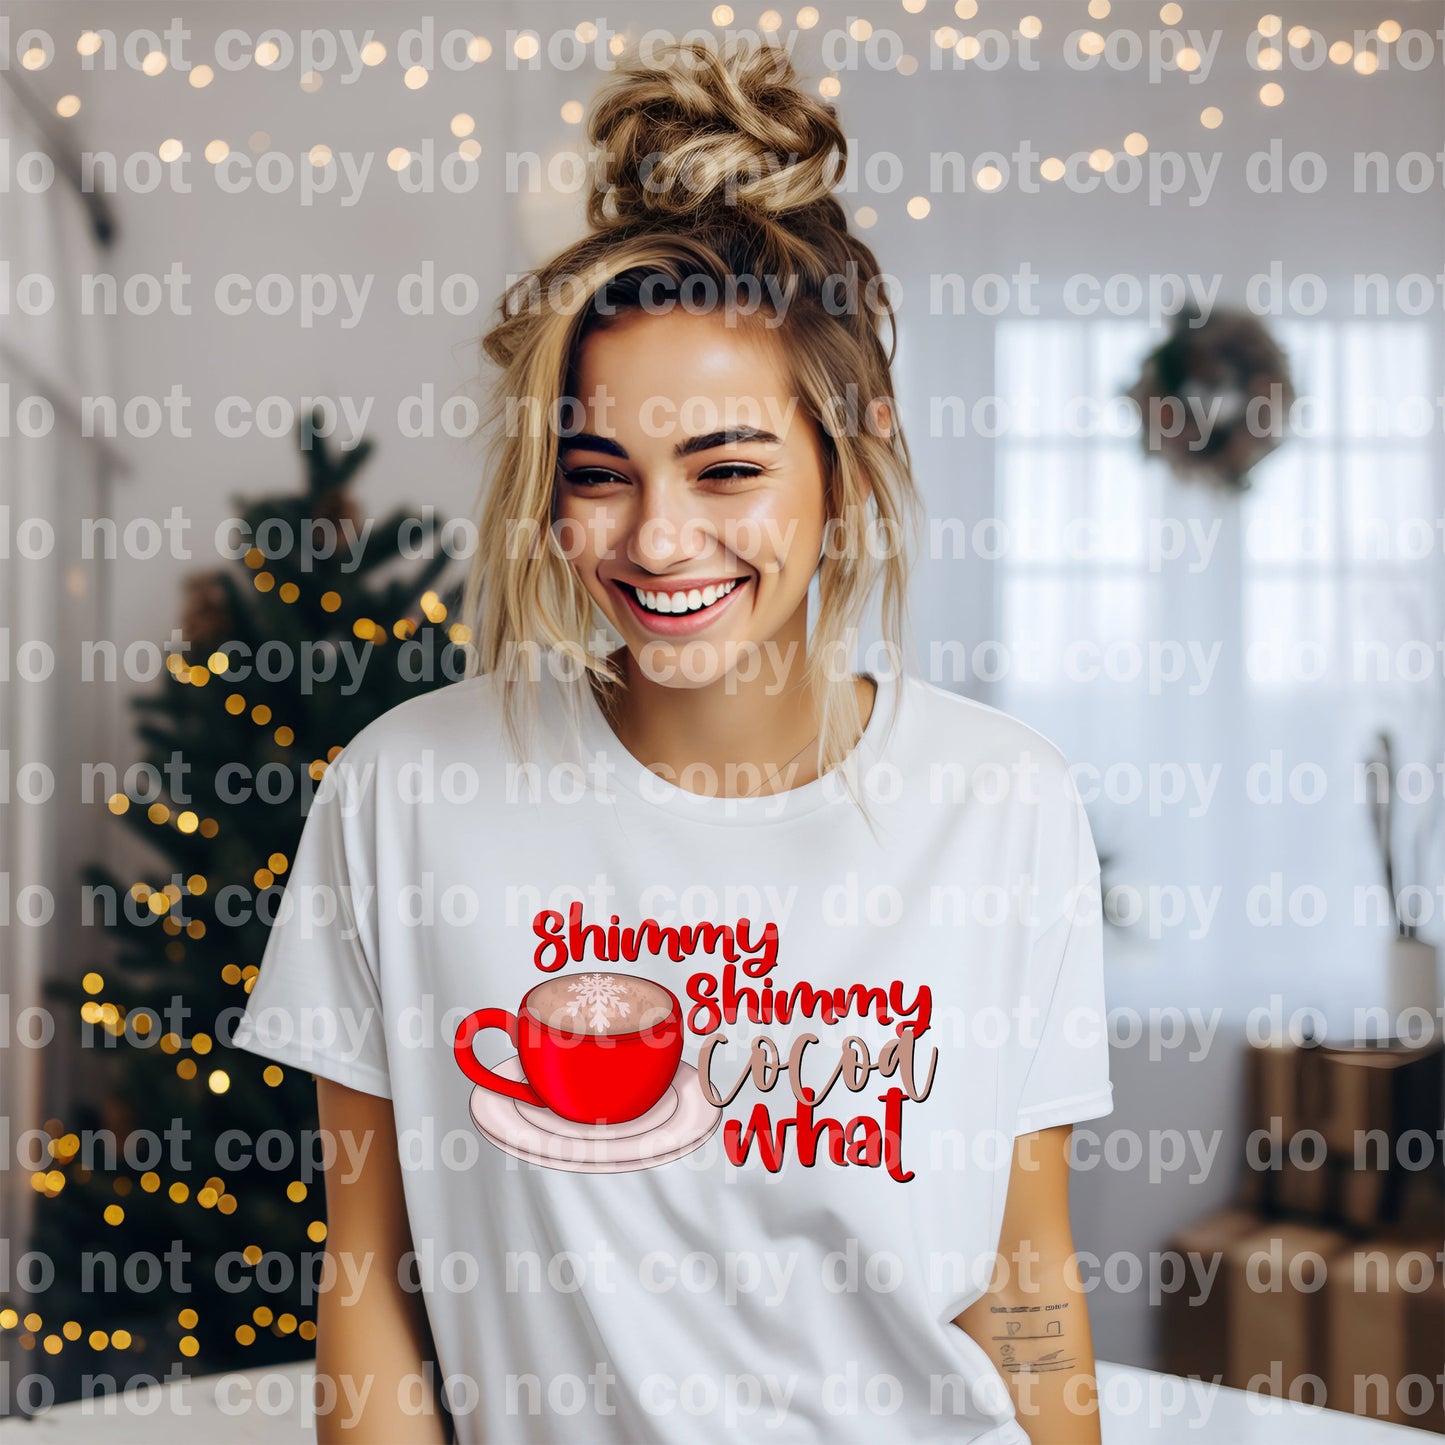 Shimmy Shimmy Cocoa What Dream Print or Sublimation Print